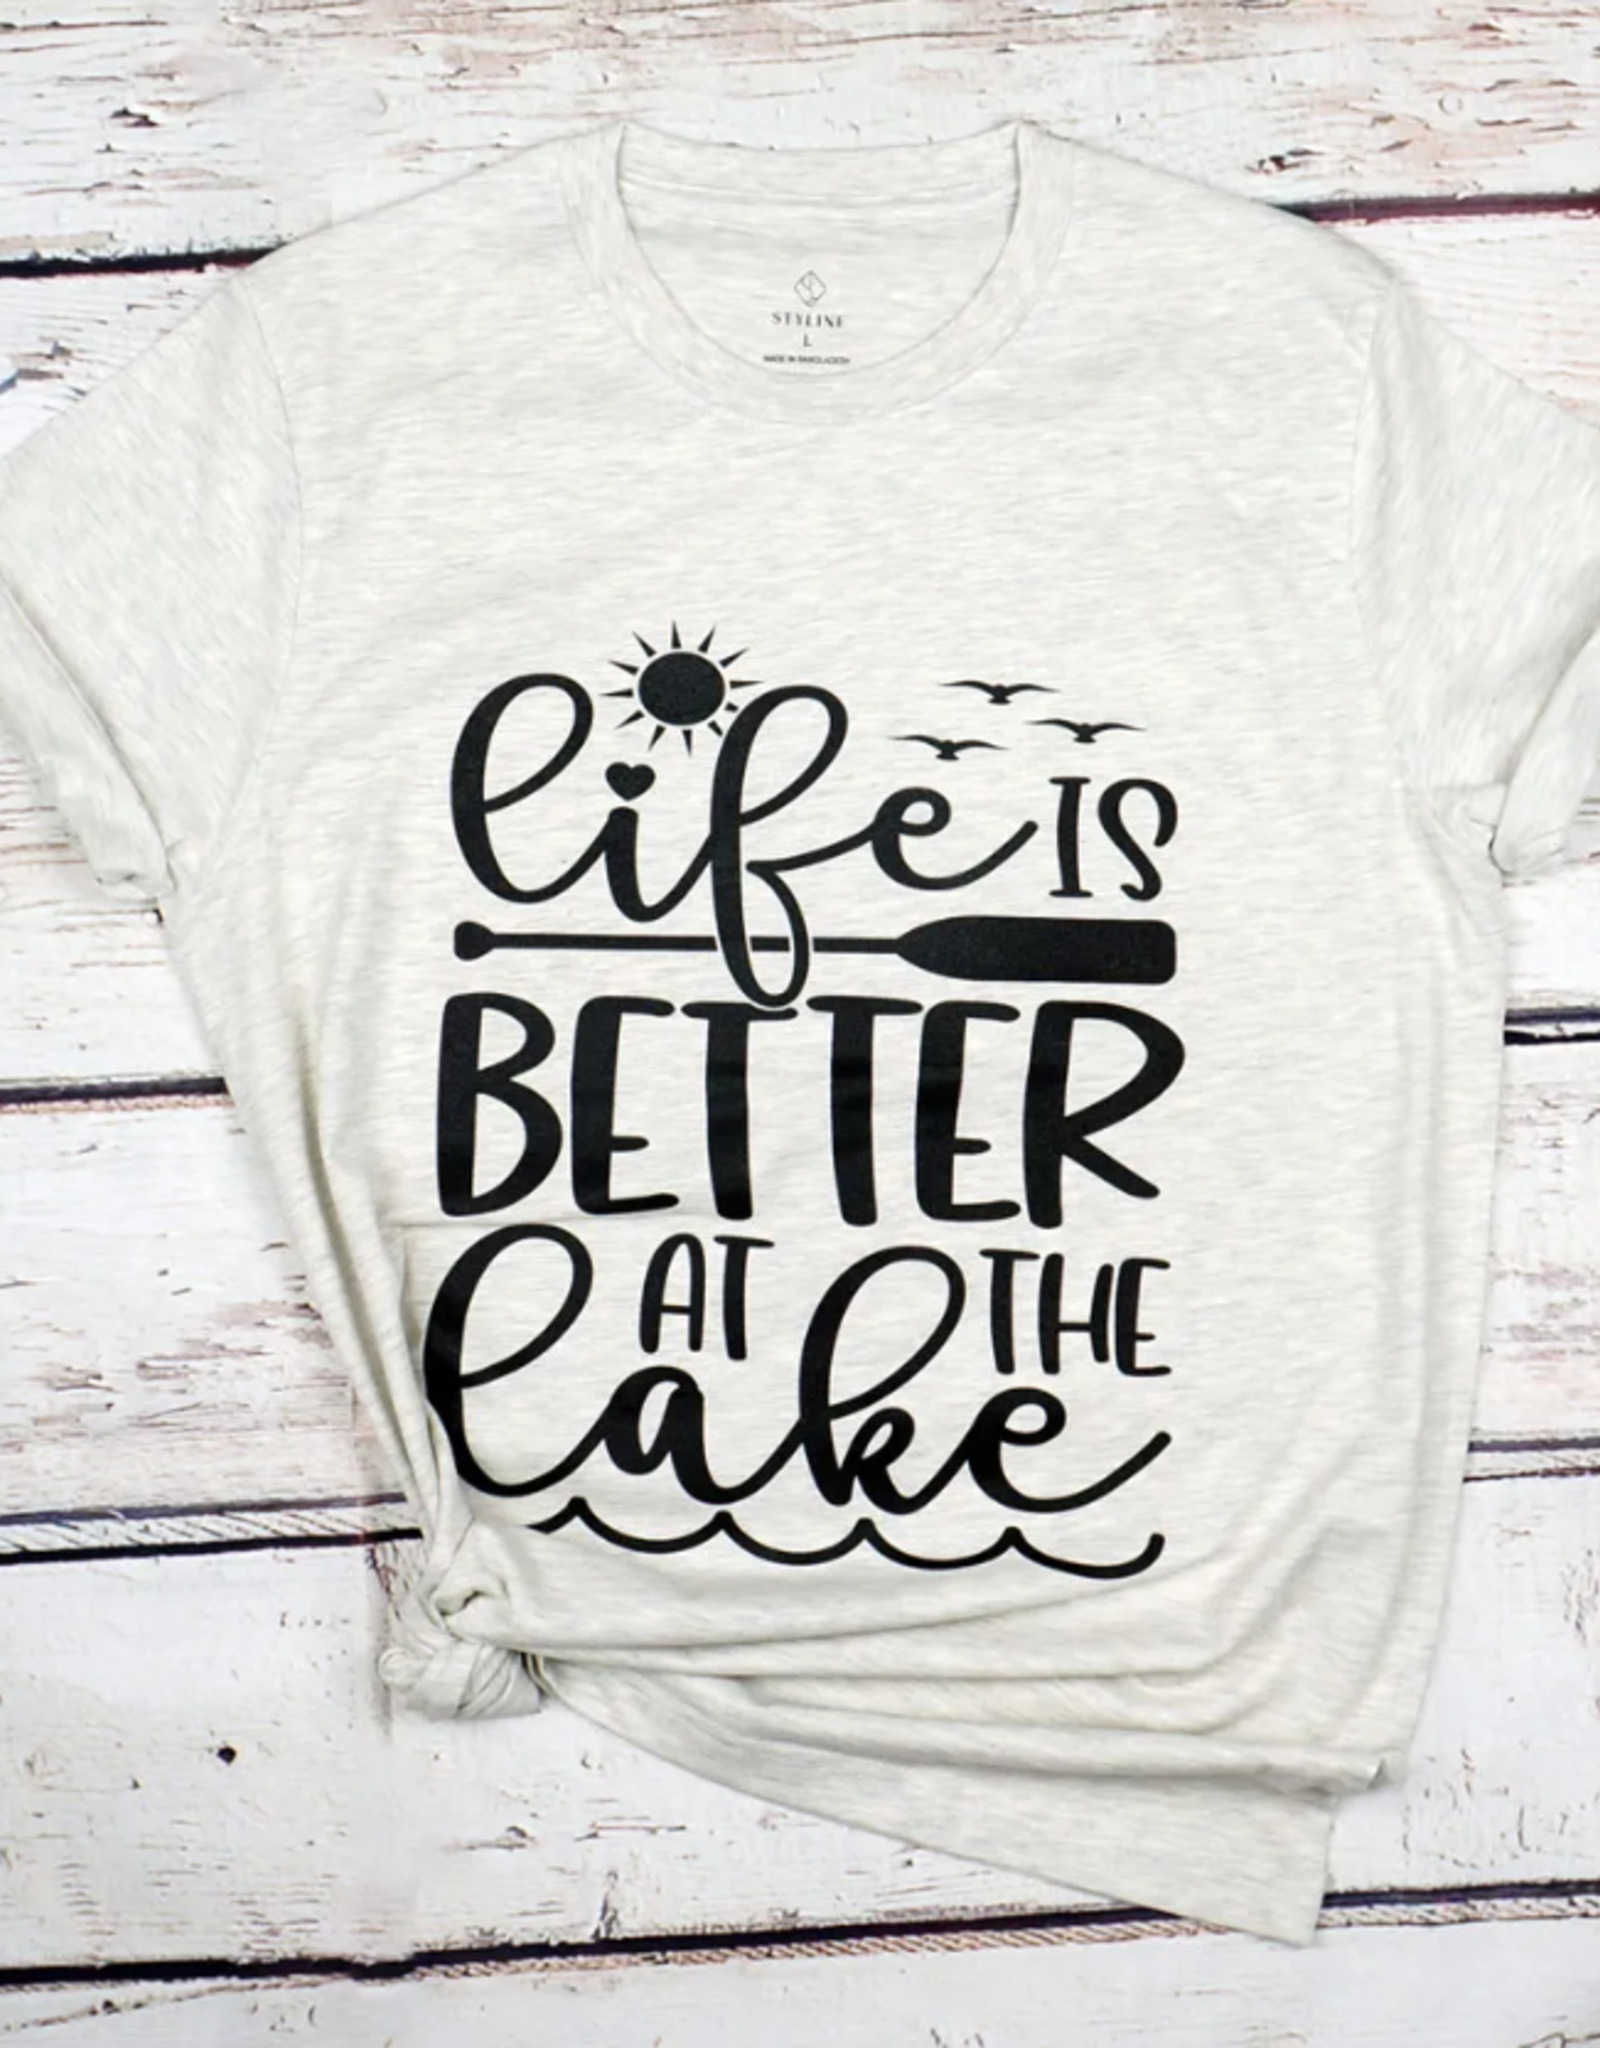 SHIRT "LIFE IS BETTER AT THE LAKE" WHITE HEATHER